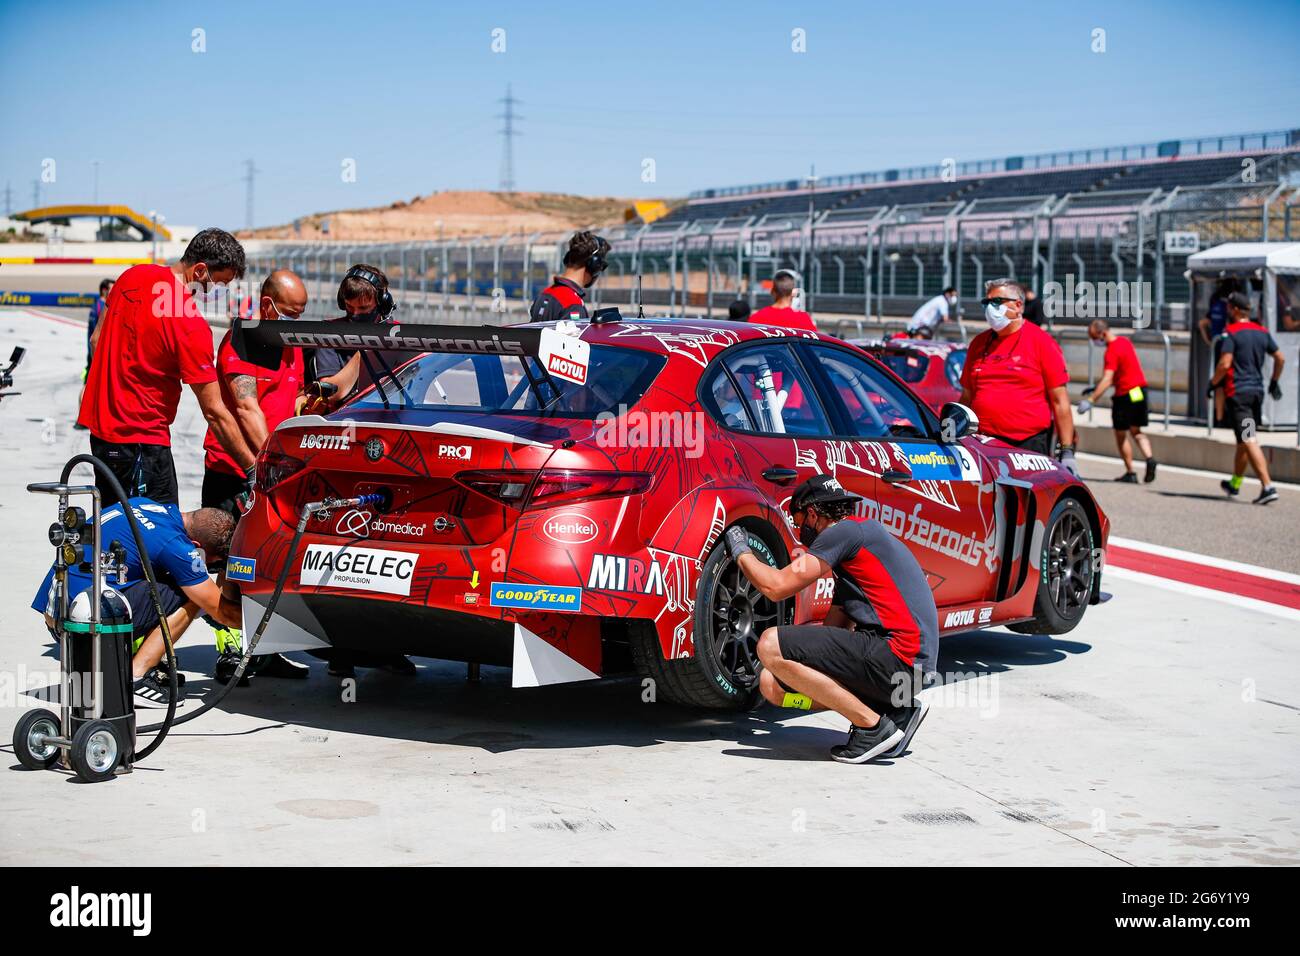 06 Webb Oliver (gbr), Romeo Ferraris/M1RA, Alfa Romeo Giulia, ambiance during the 2021 Pure ETCR Championship in Motorland Aragon, 2nd round of the 2021 Pure ETCR Championshi, on the Ciudad del Motor de Aragon, from July 9 to 11, 2021 in Alcaniz, Spain - Photo Florent Gooden / DPPI Stock Photo